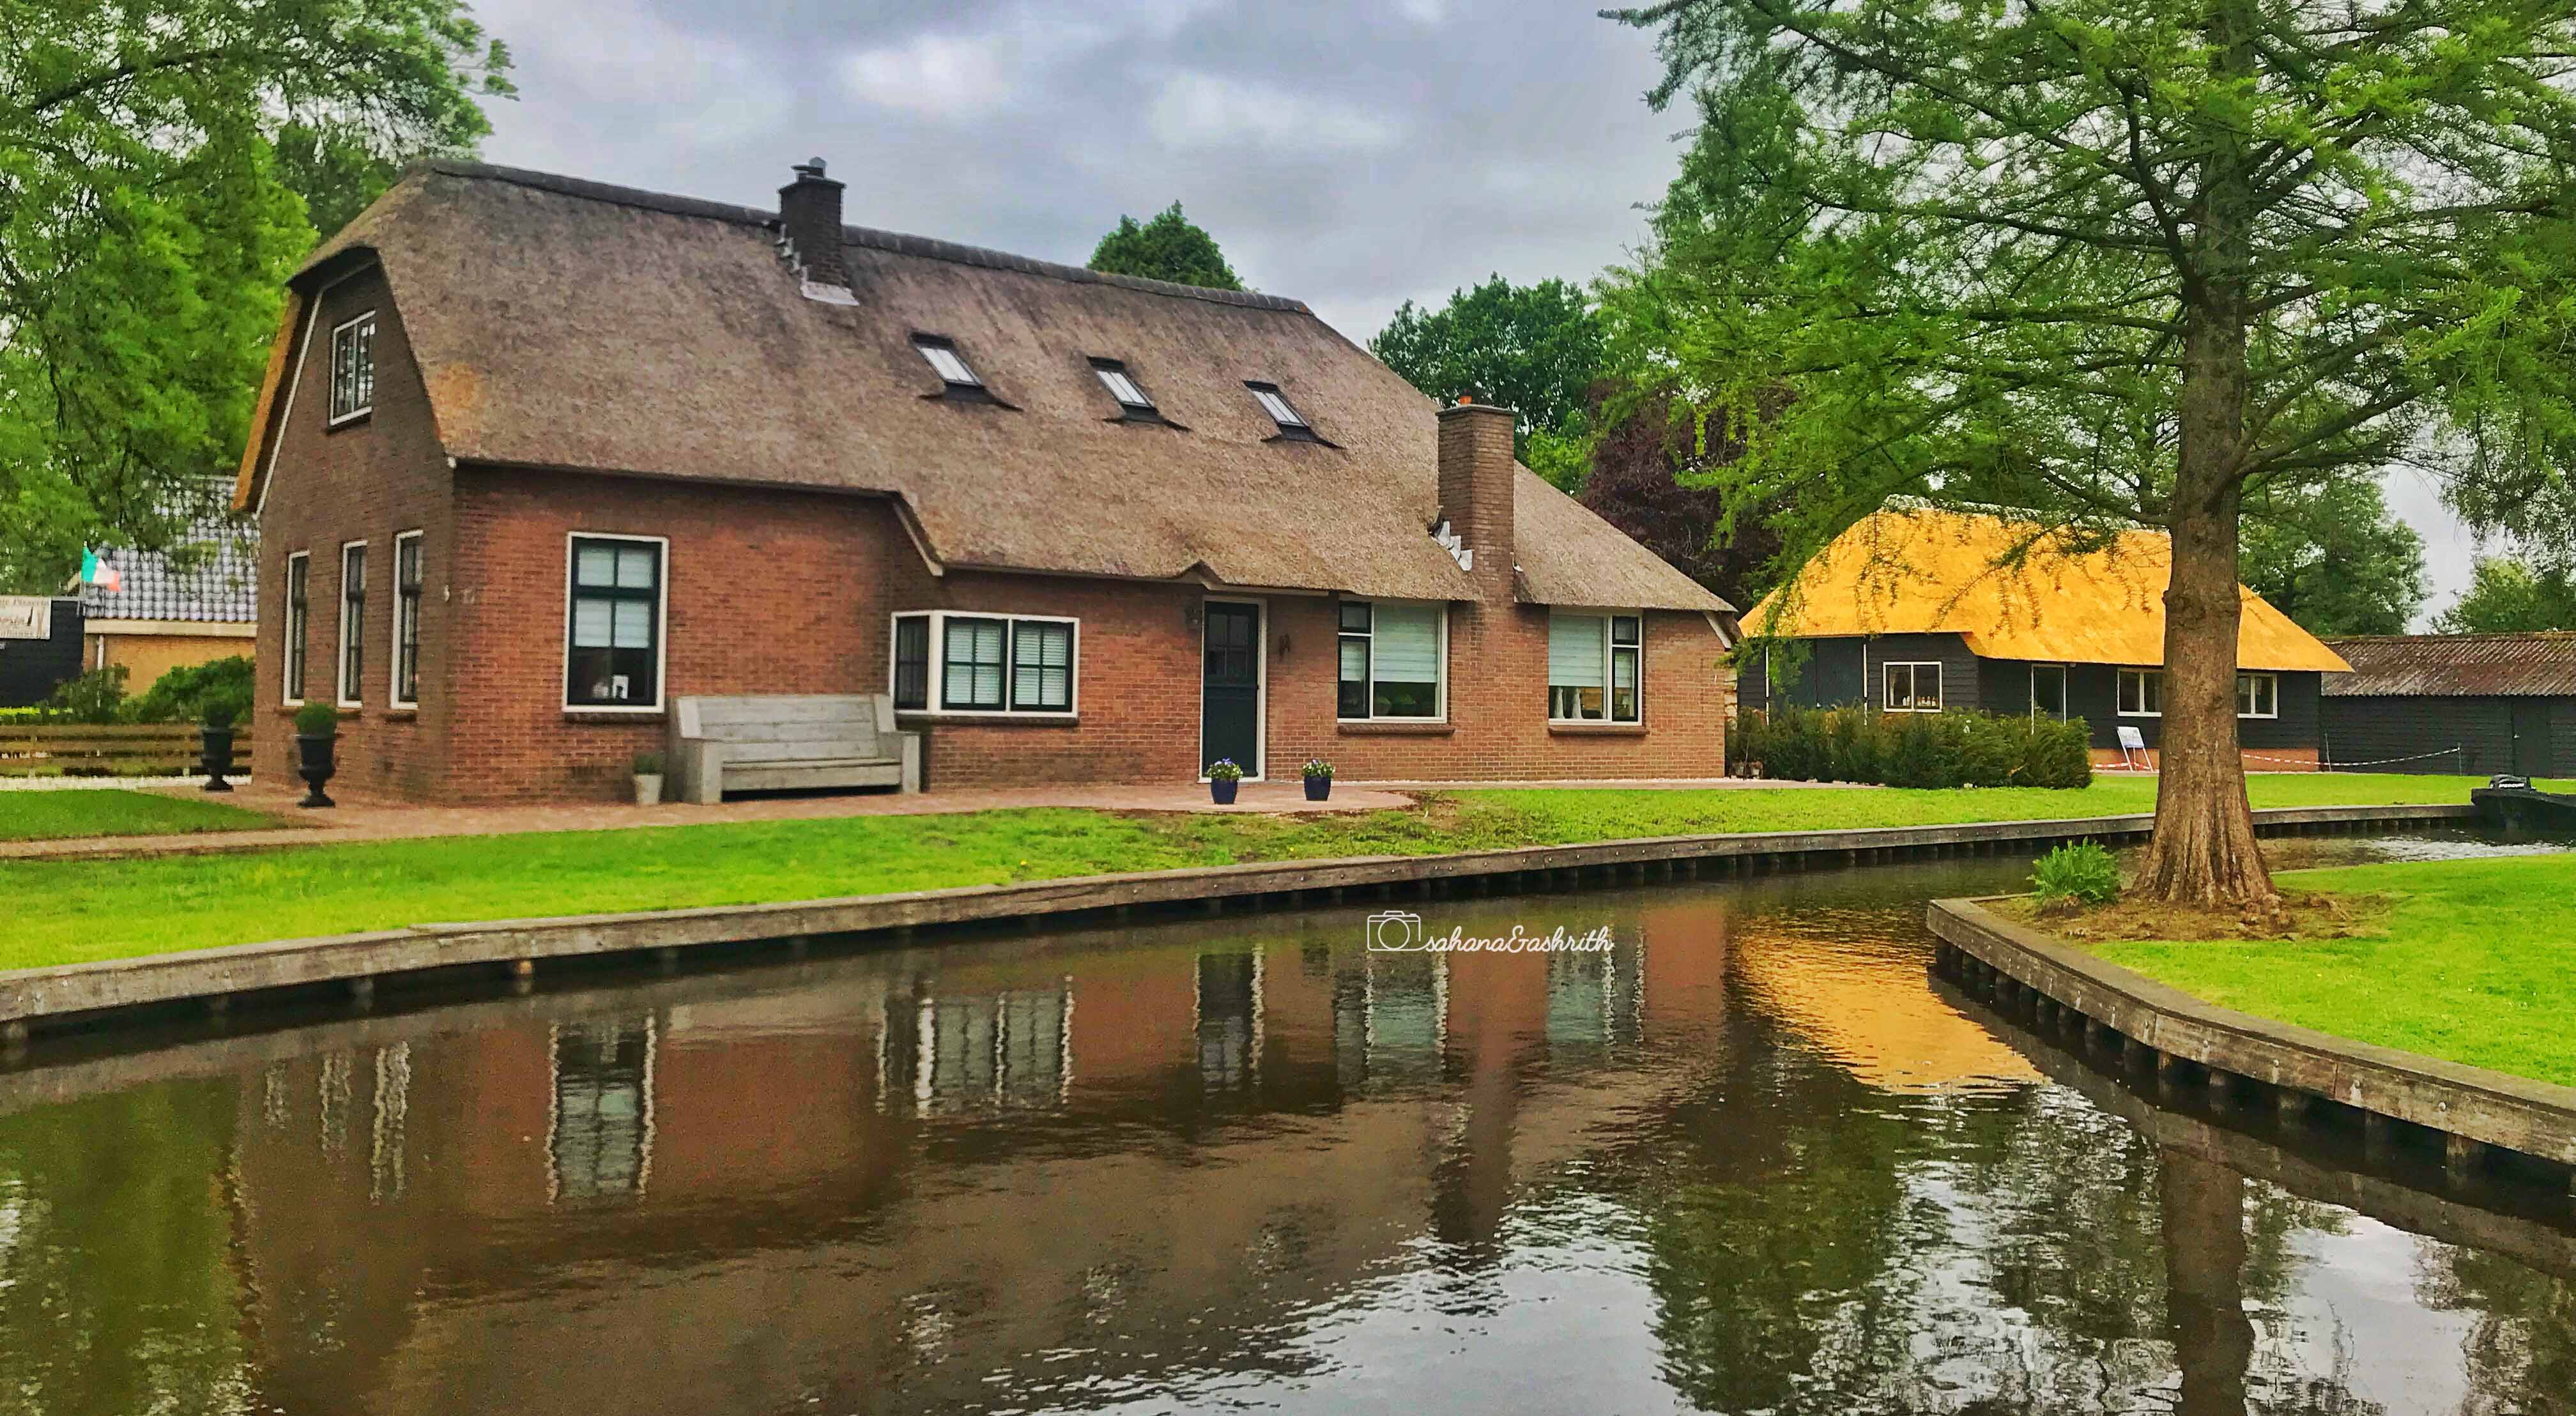 Brown house with thtached roof by the canal side in Giethoorn - Netherlands Trvael guide